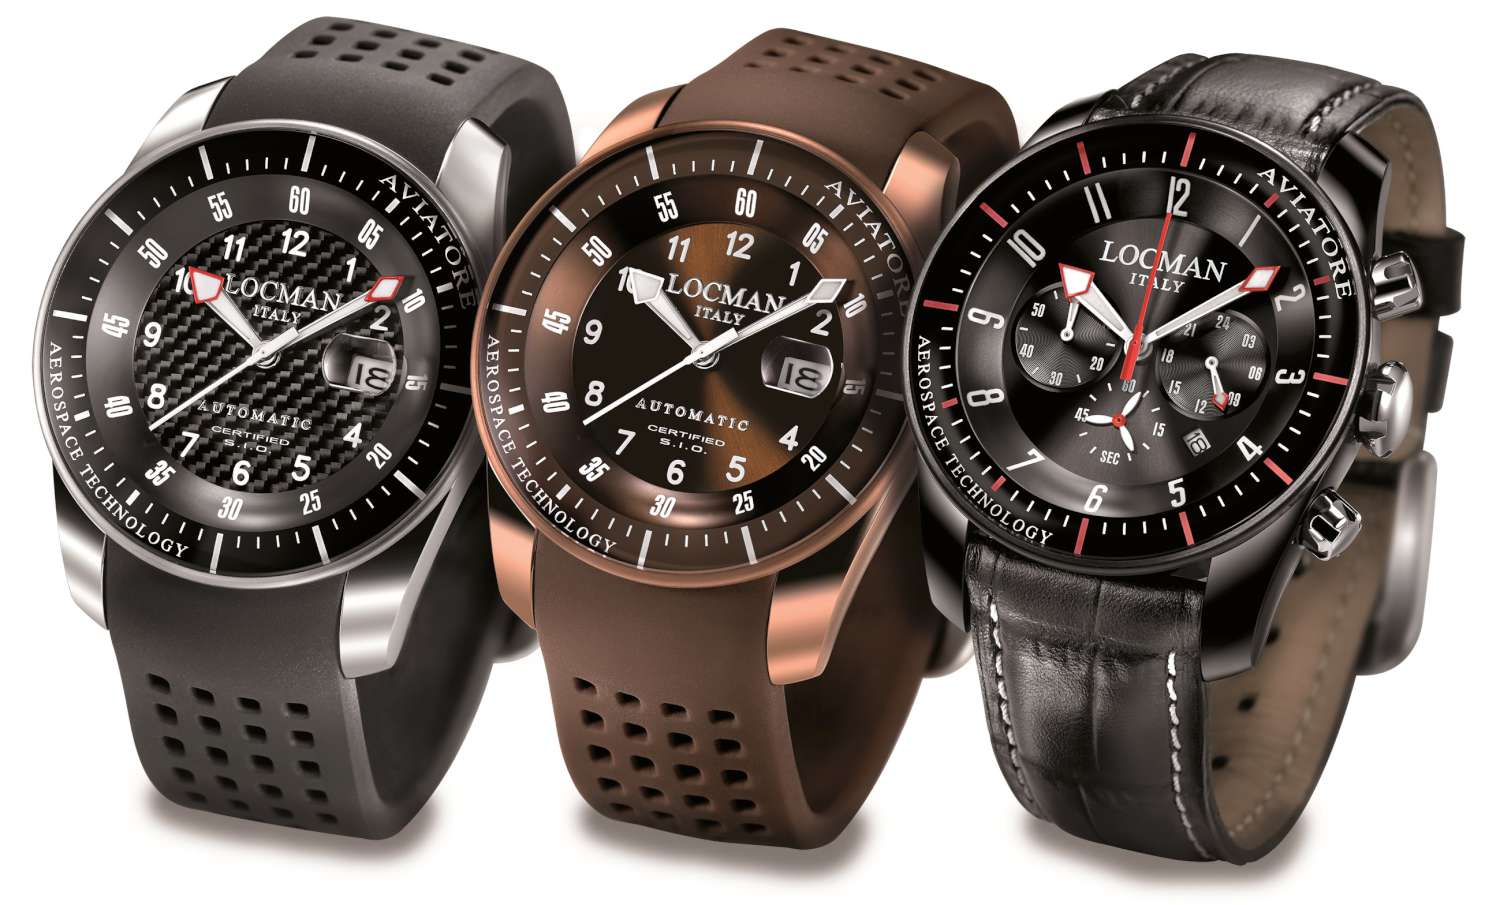 Three of the new Aviatore models by Locman; the first two on the left are automatic, the one on the right is a quartz chronograph